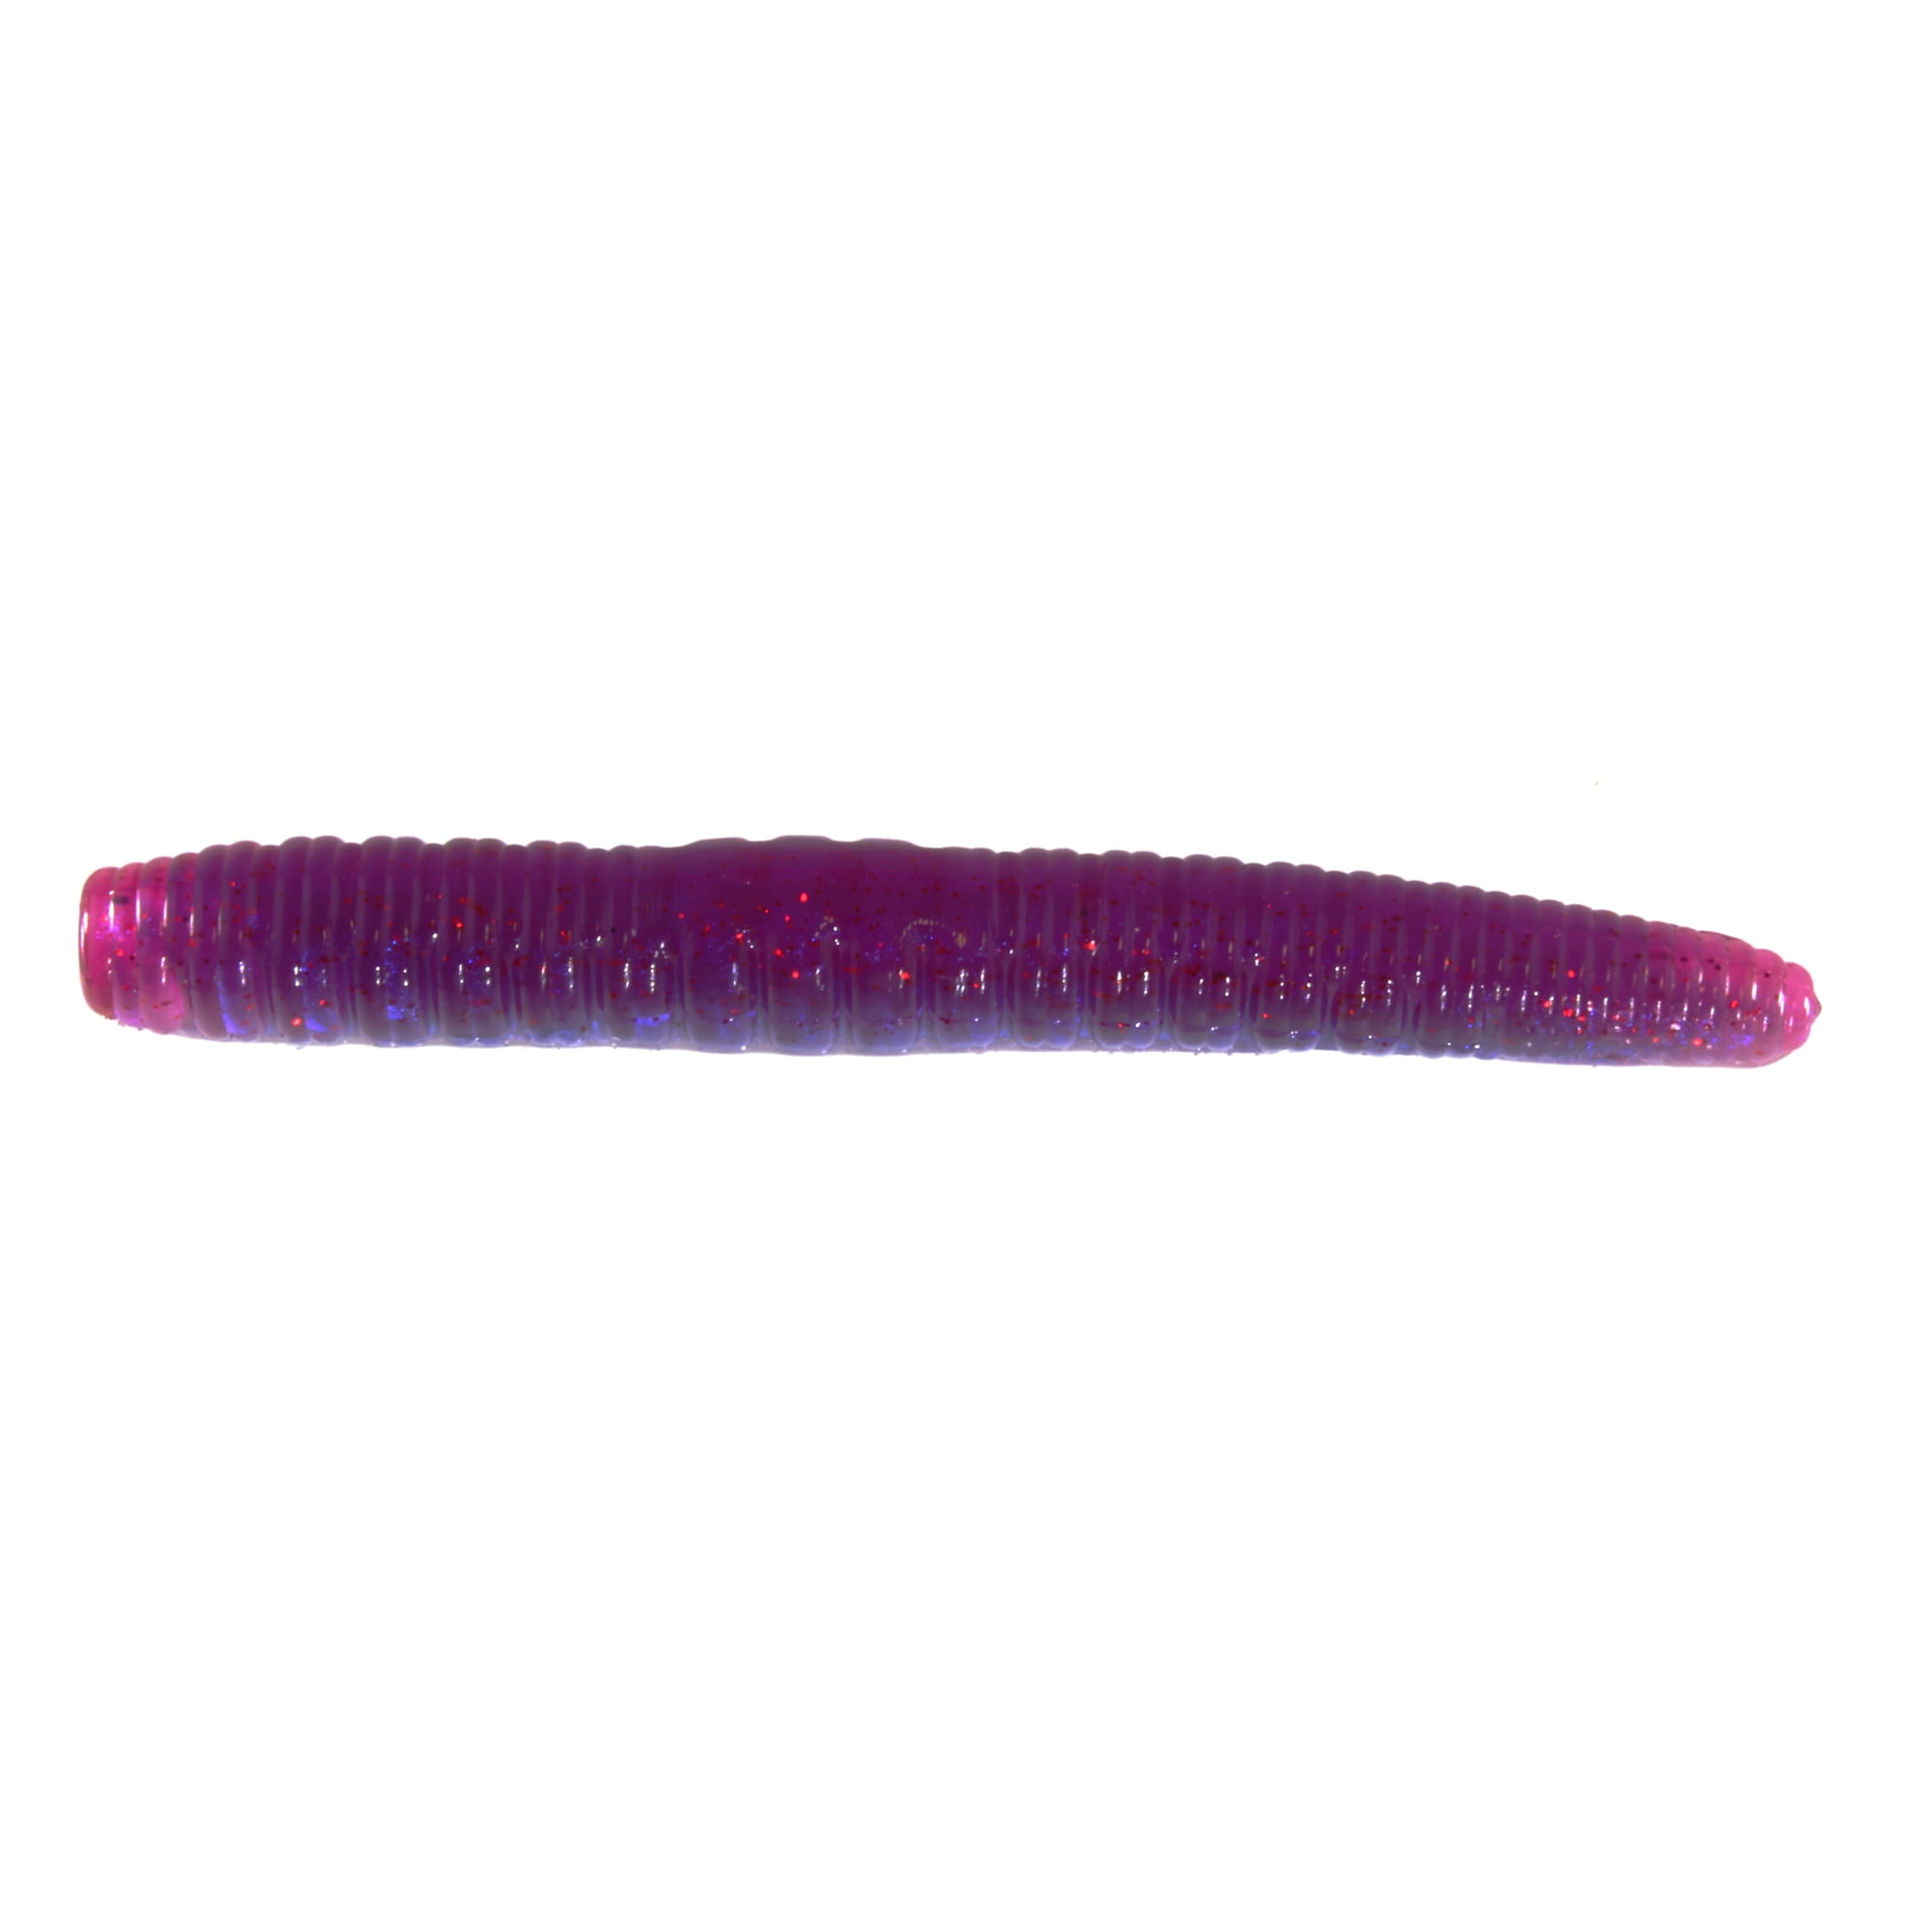 Roboworm N3-H3HO Ned Worm 3 Morning Dawn, 8/Pack, Soft Baits